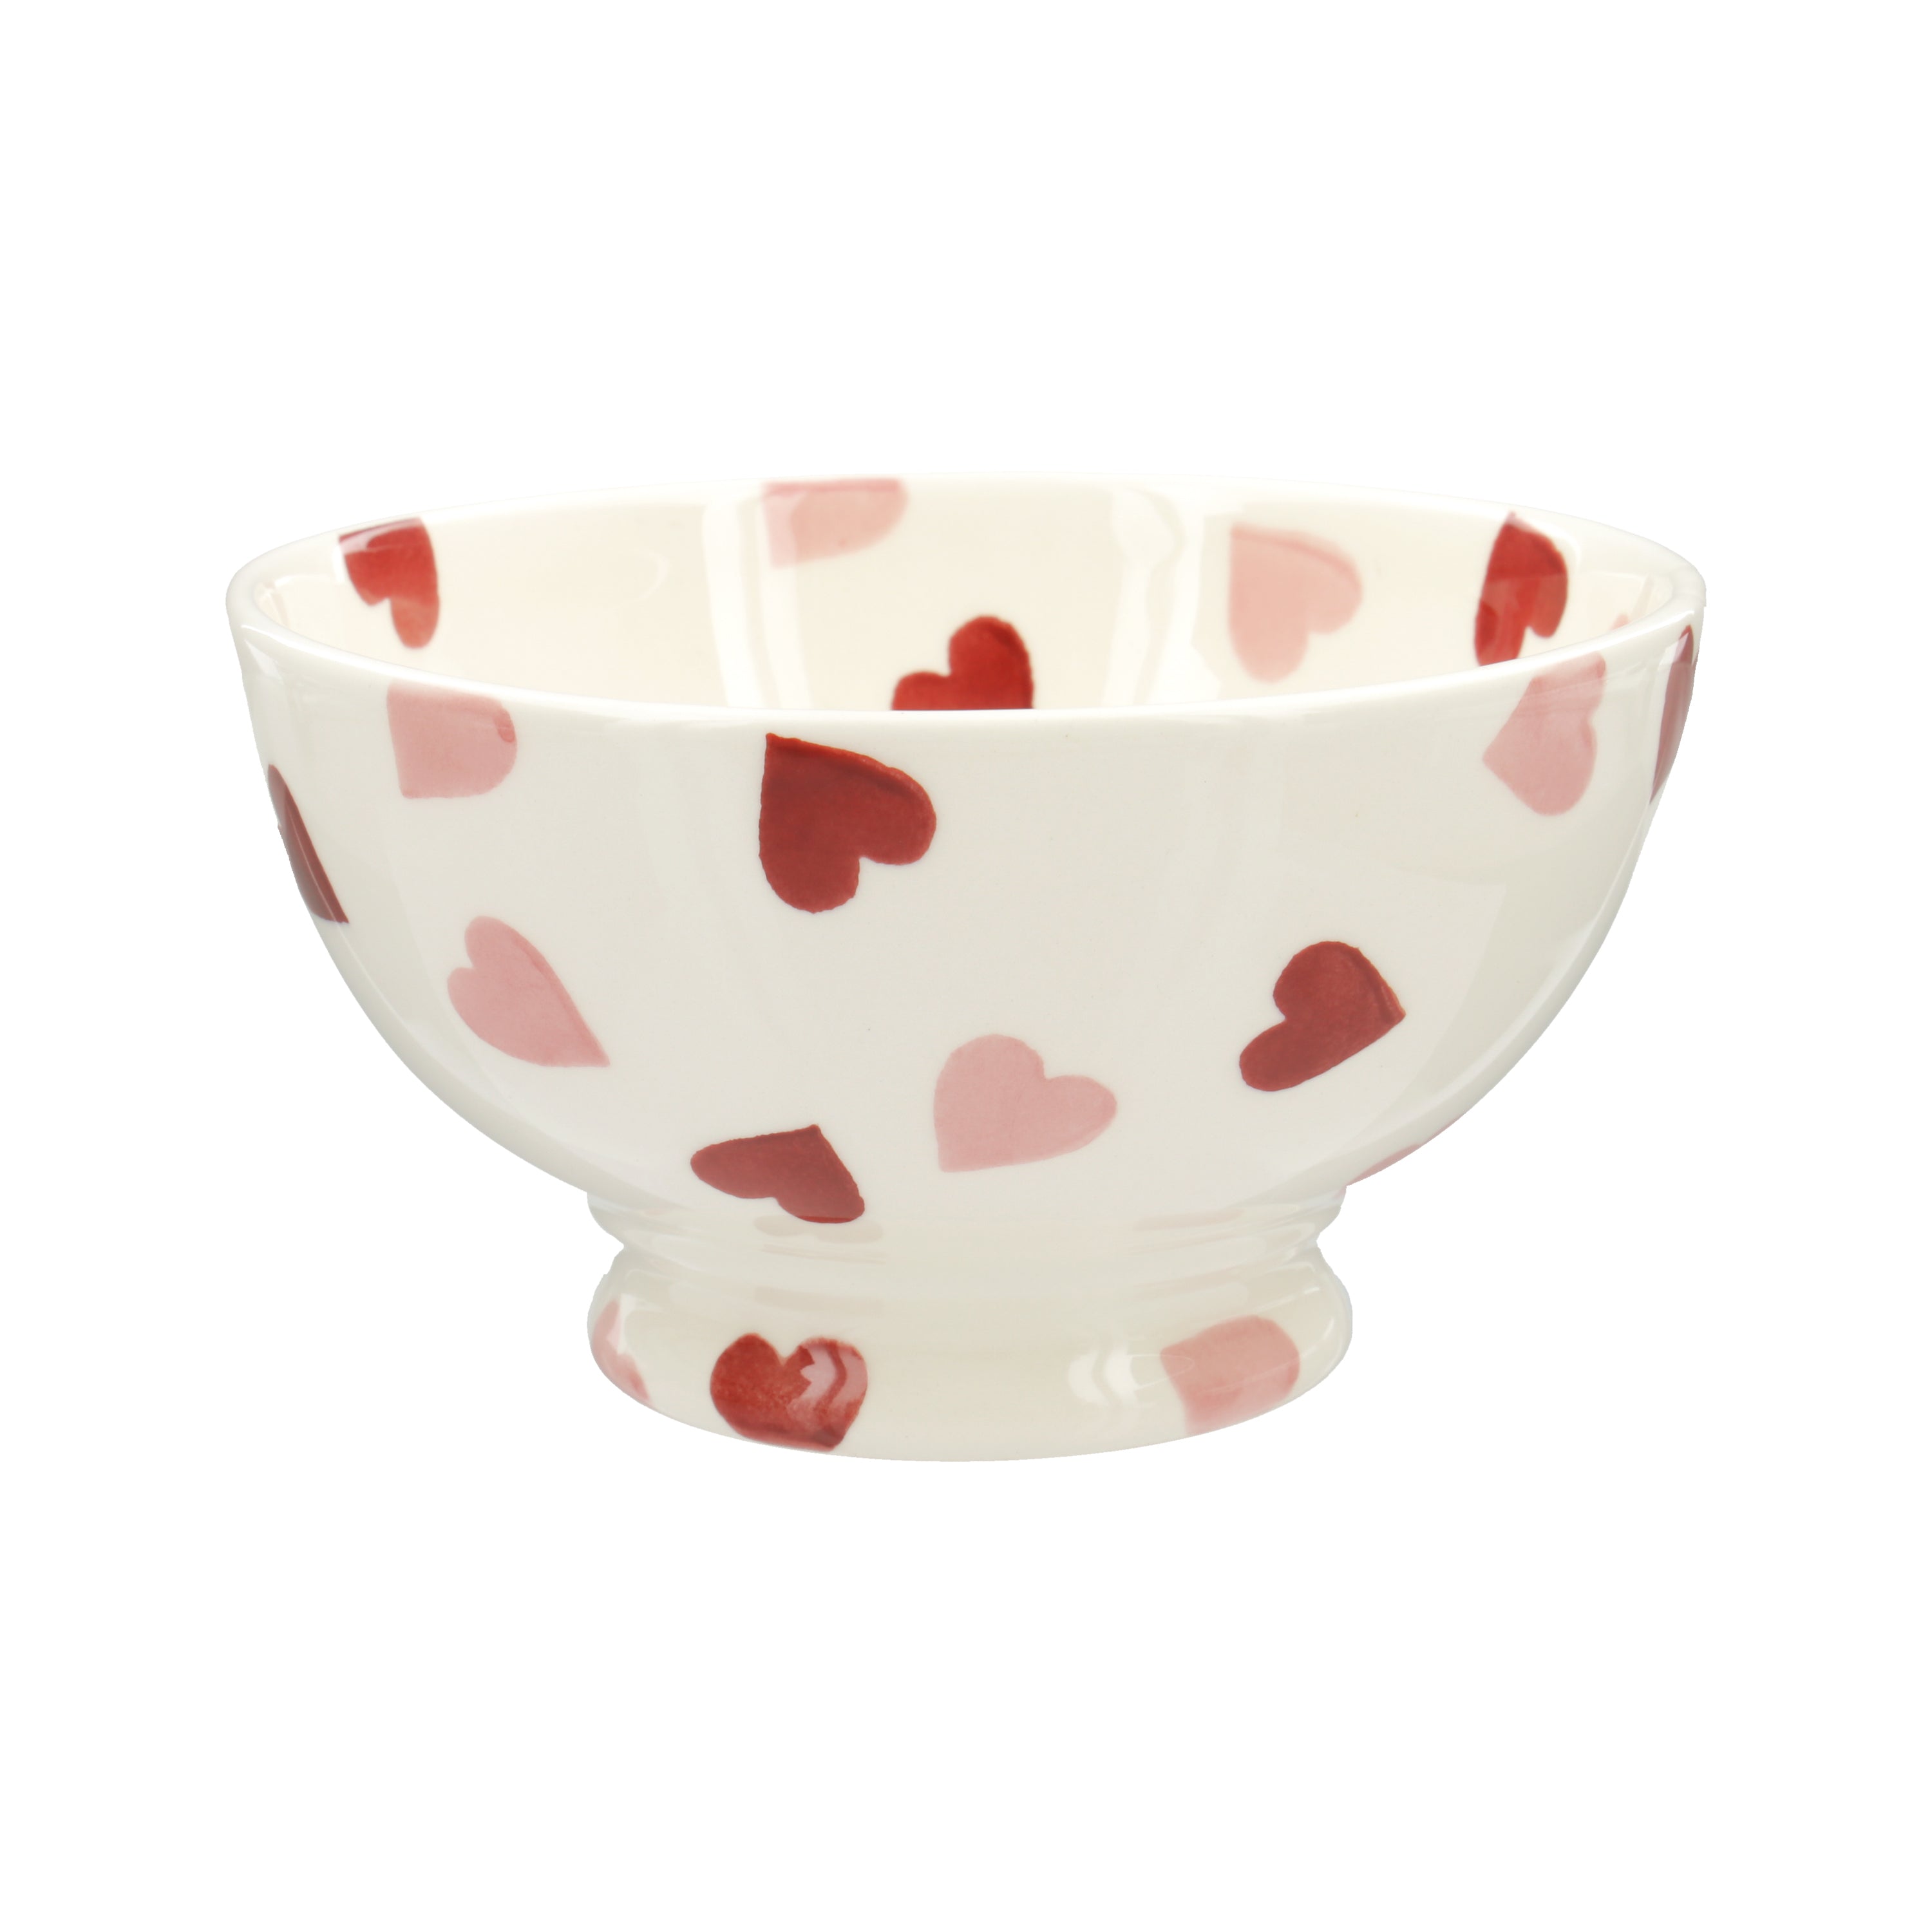 Emma Bridgewater |  Seconds Pink Hearts French Bowl - Unique Handmade & Handpainted English Earthenw